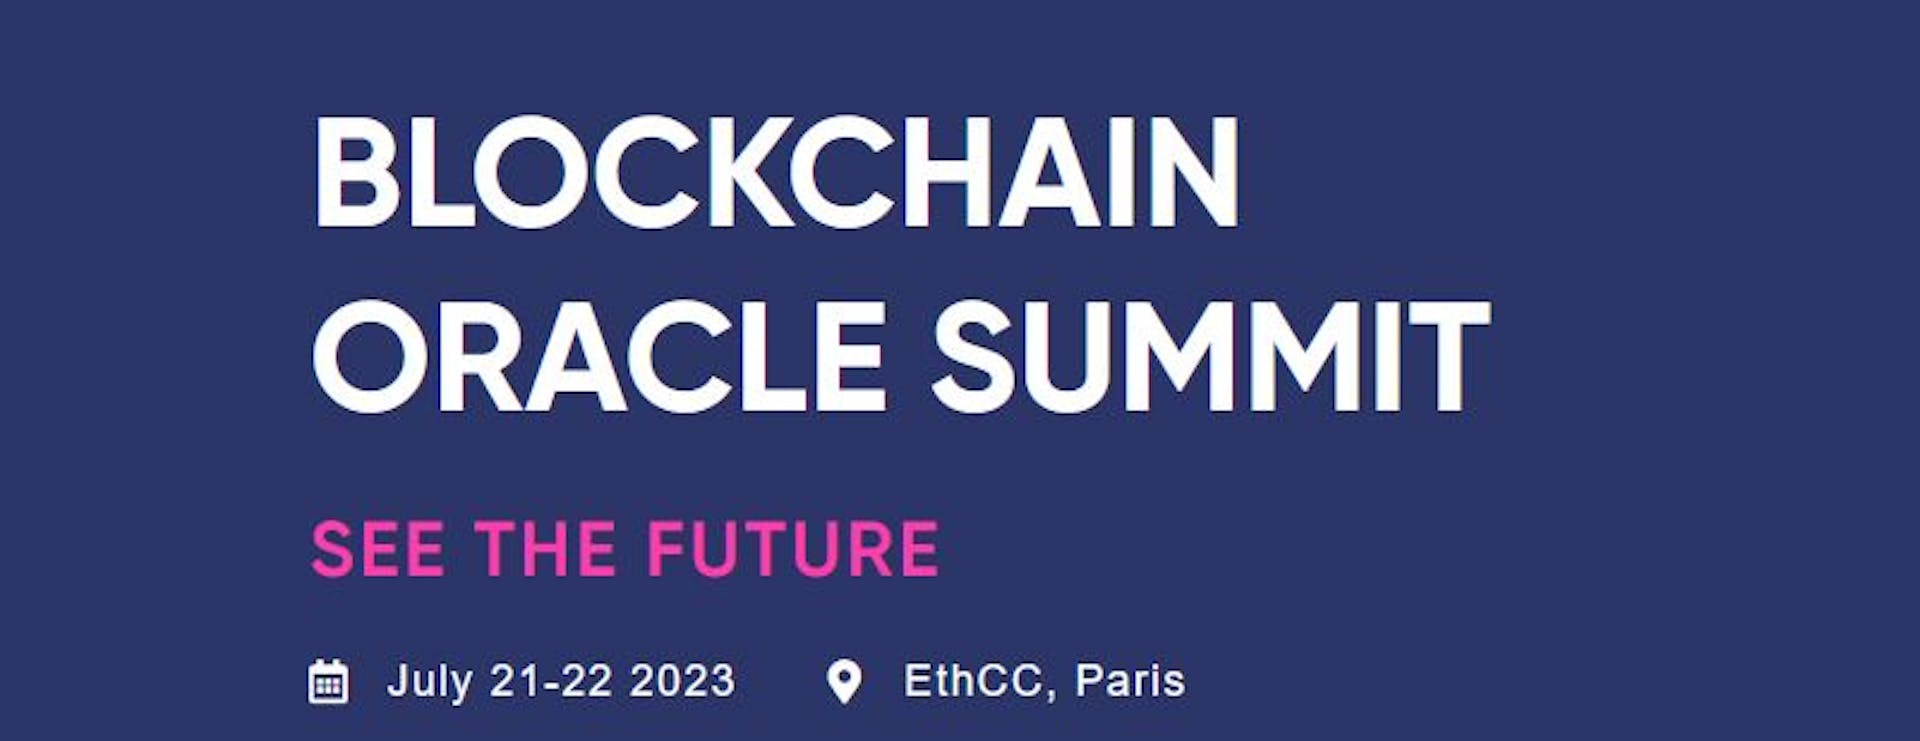 featured image - Blockchain Oracle Innovations & the 2023 Blockchain Oracle Summit (Parte 2)